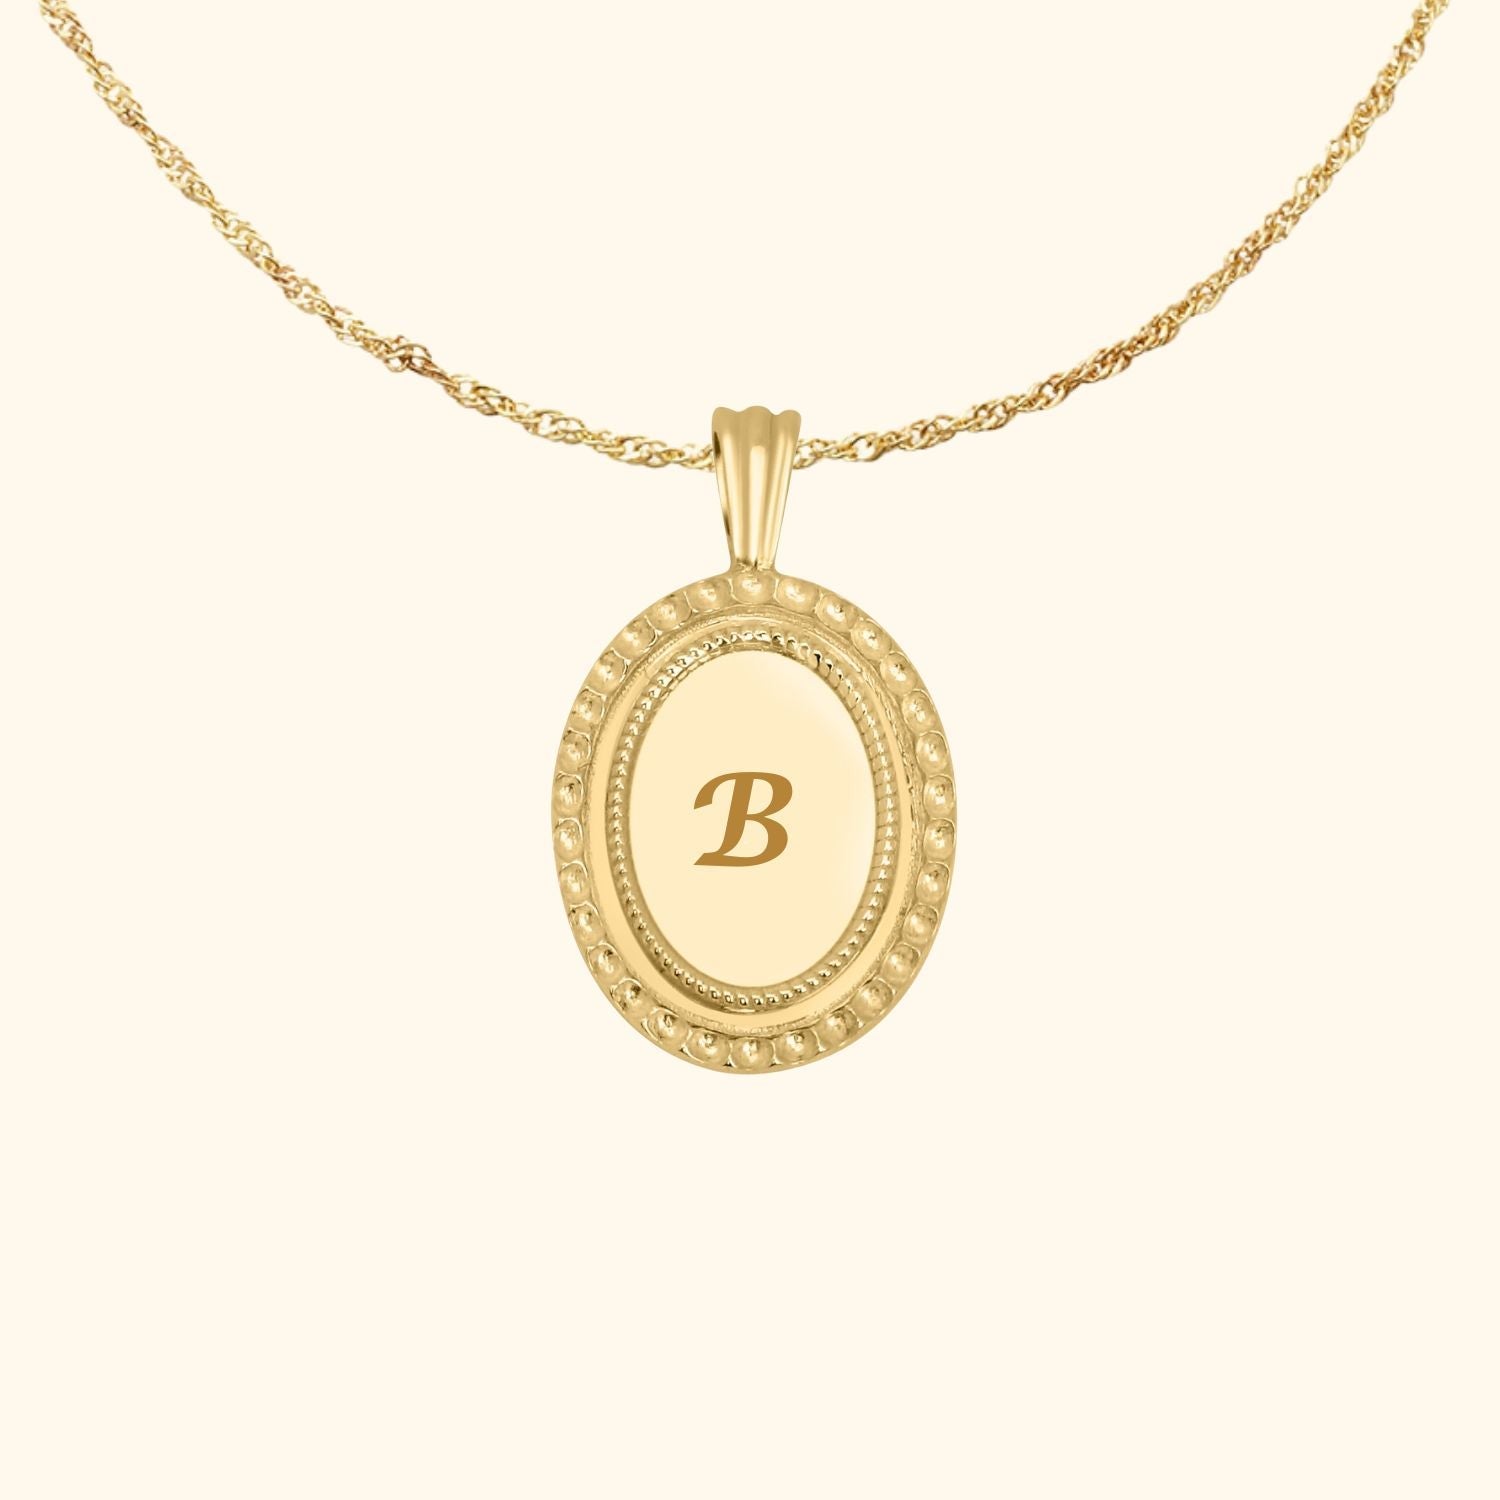 Medallion necklace with letter